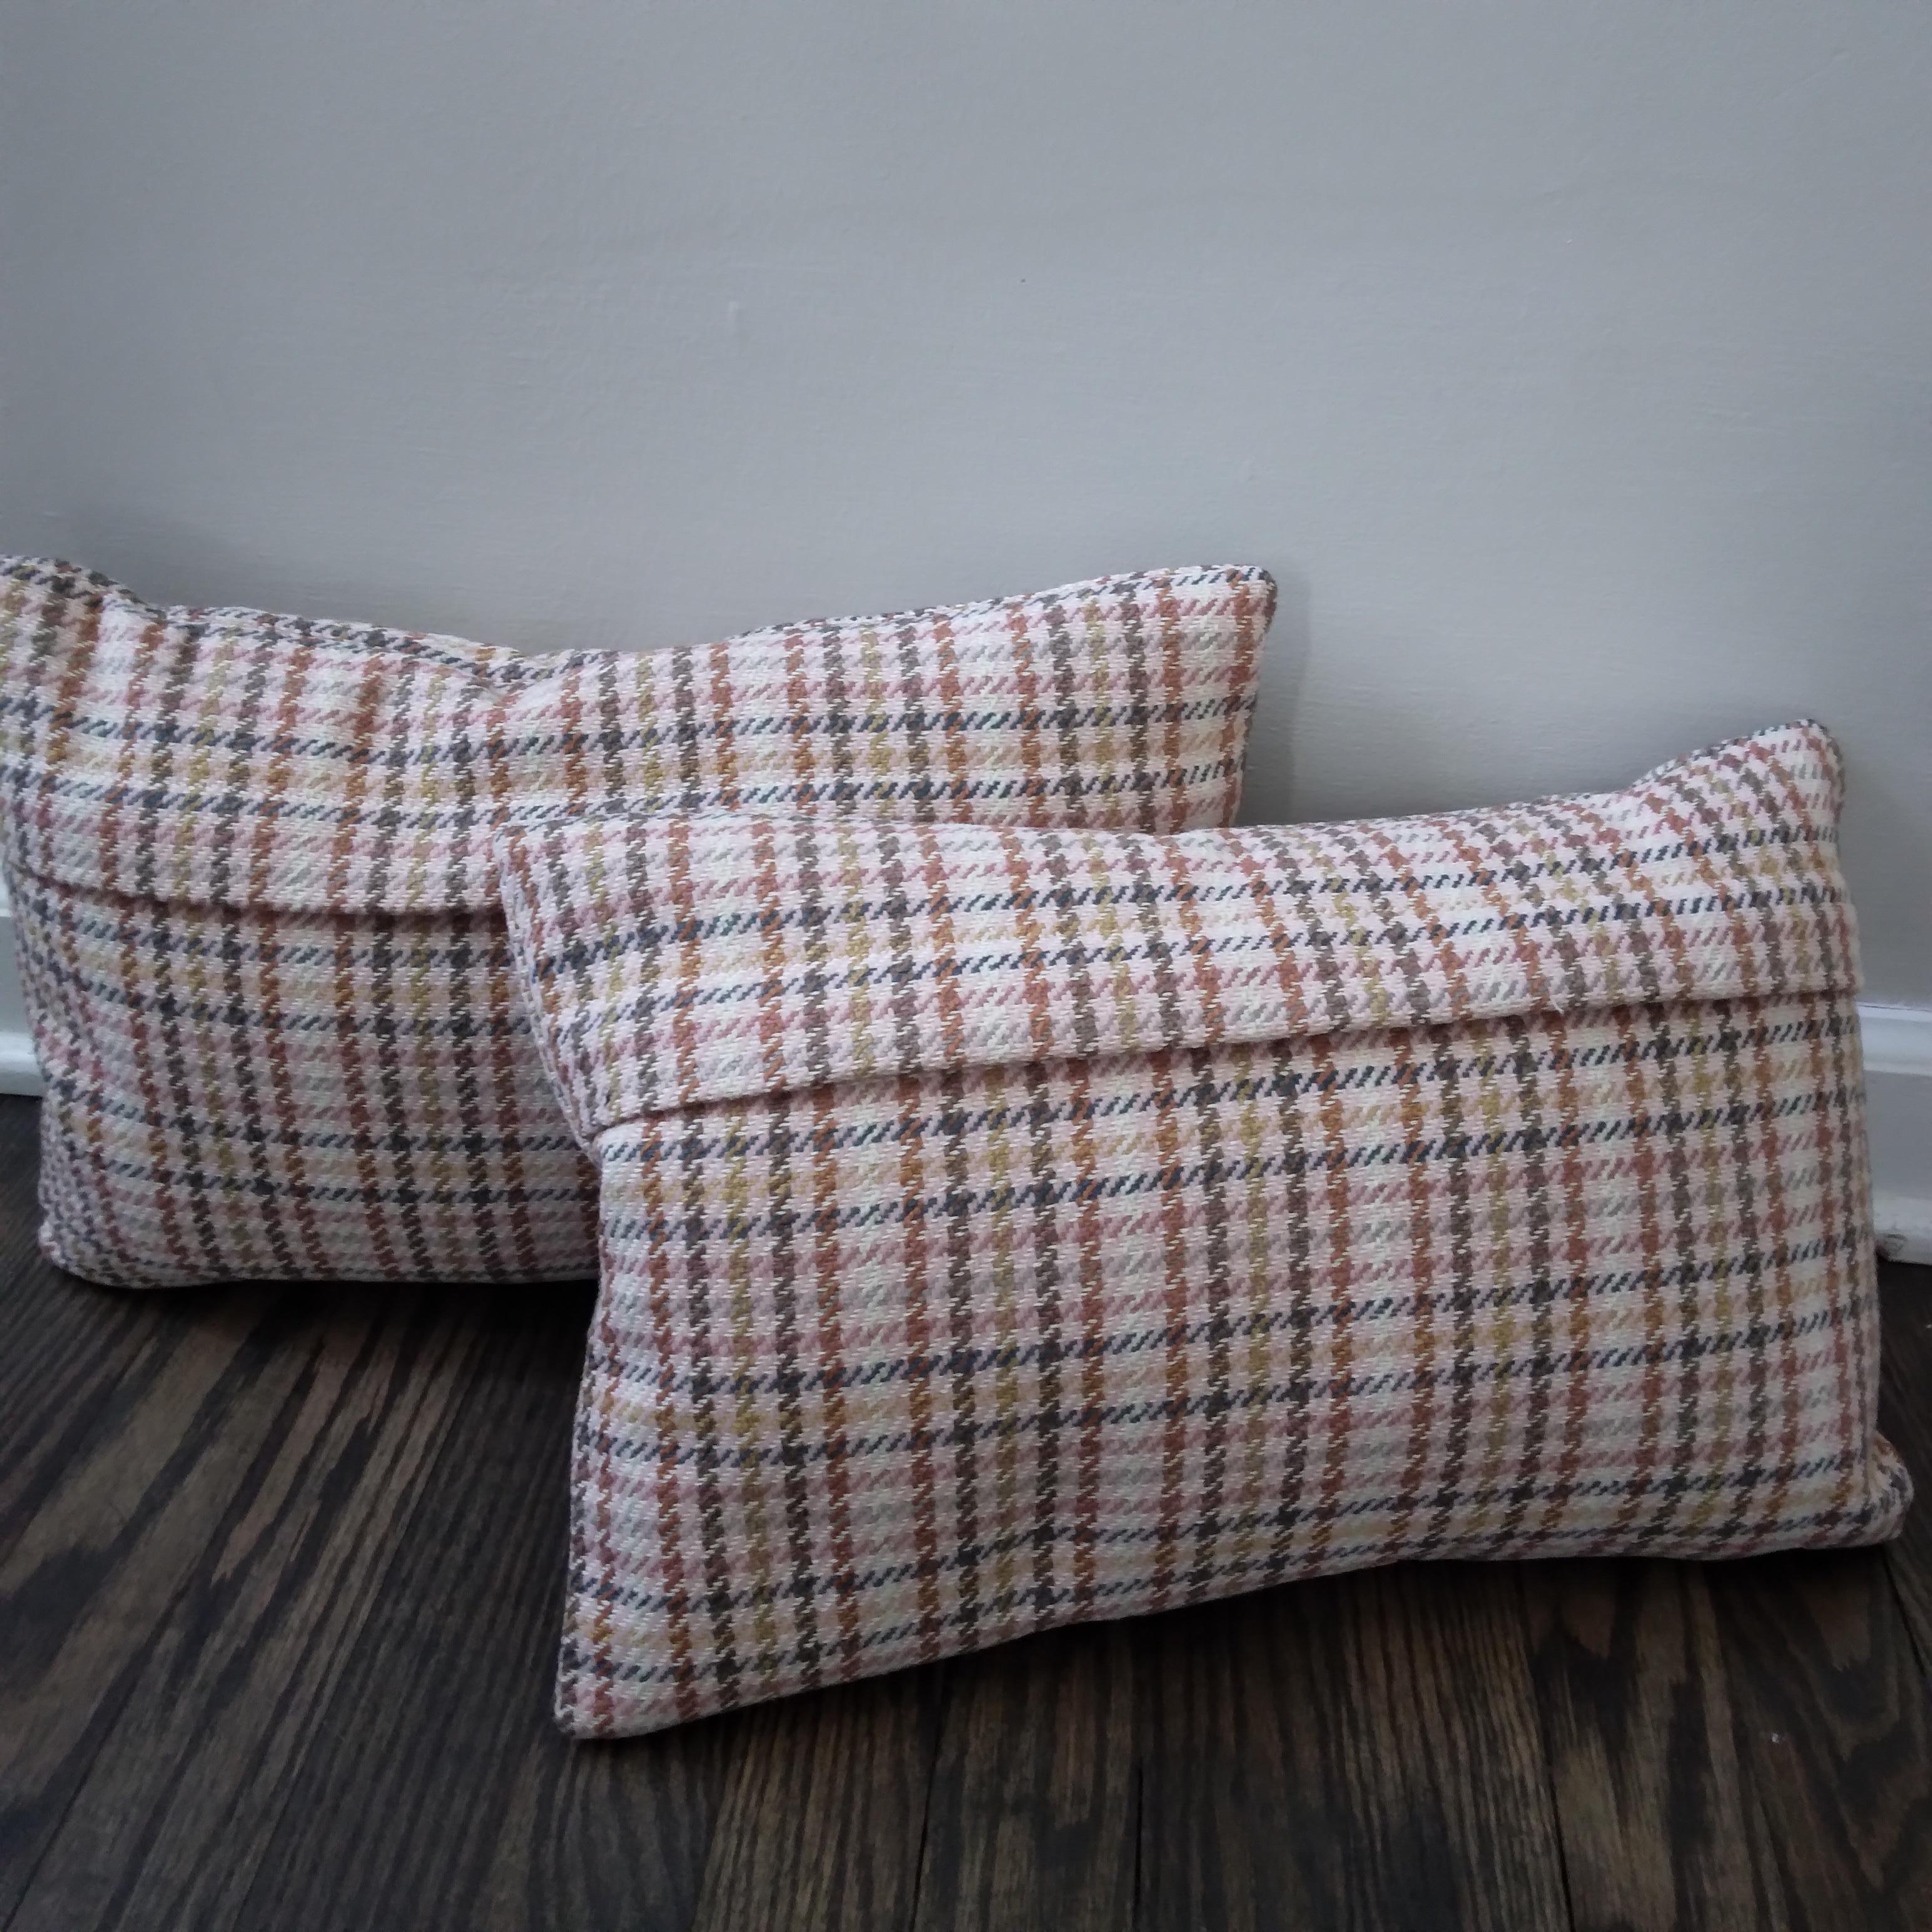 Mid-Century Modern Houndstooth Plaid Lumbar Pillows in Pink - a pair  For Sale 1